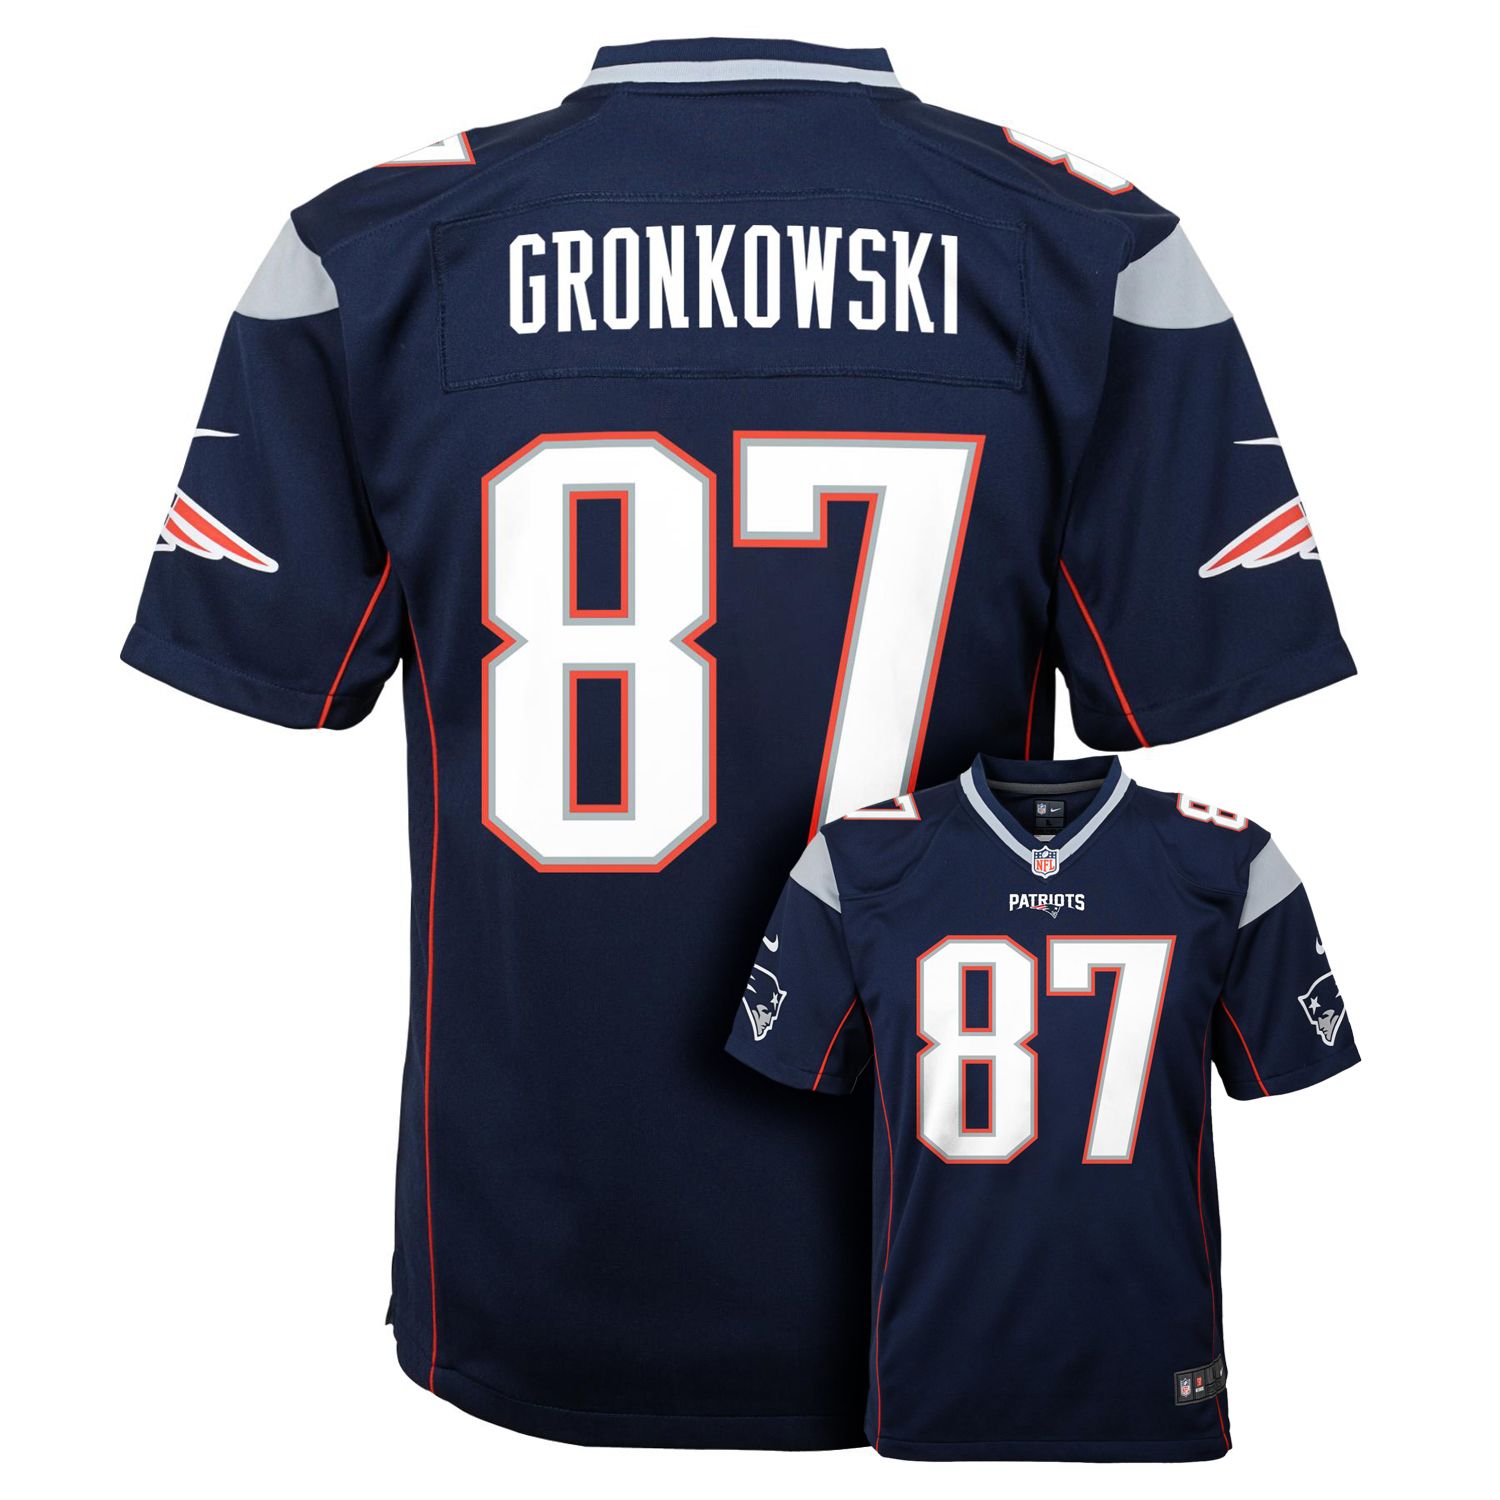 gronkowski jersey for sale